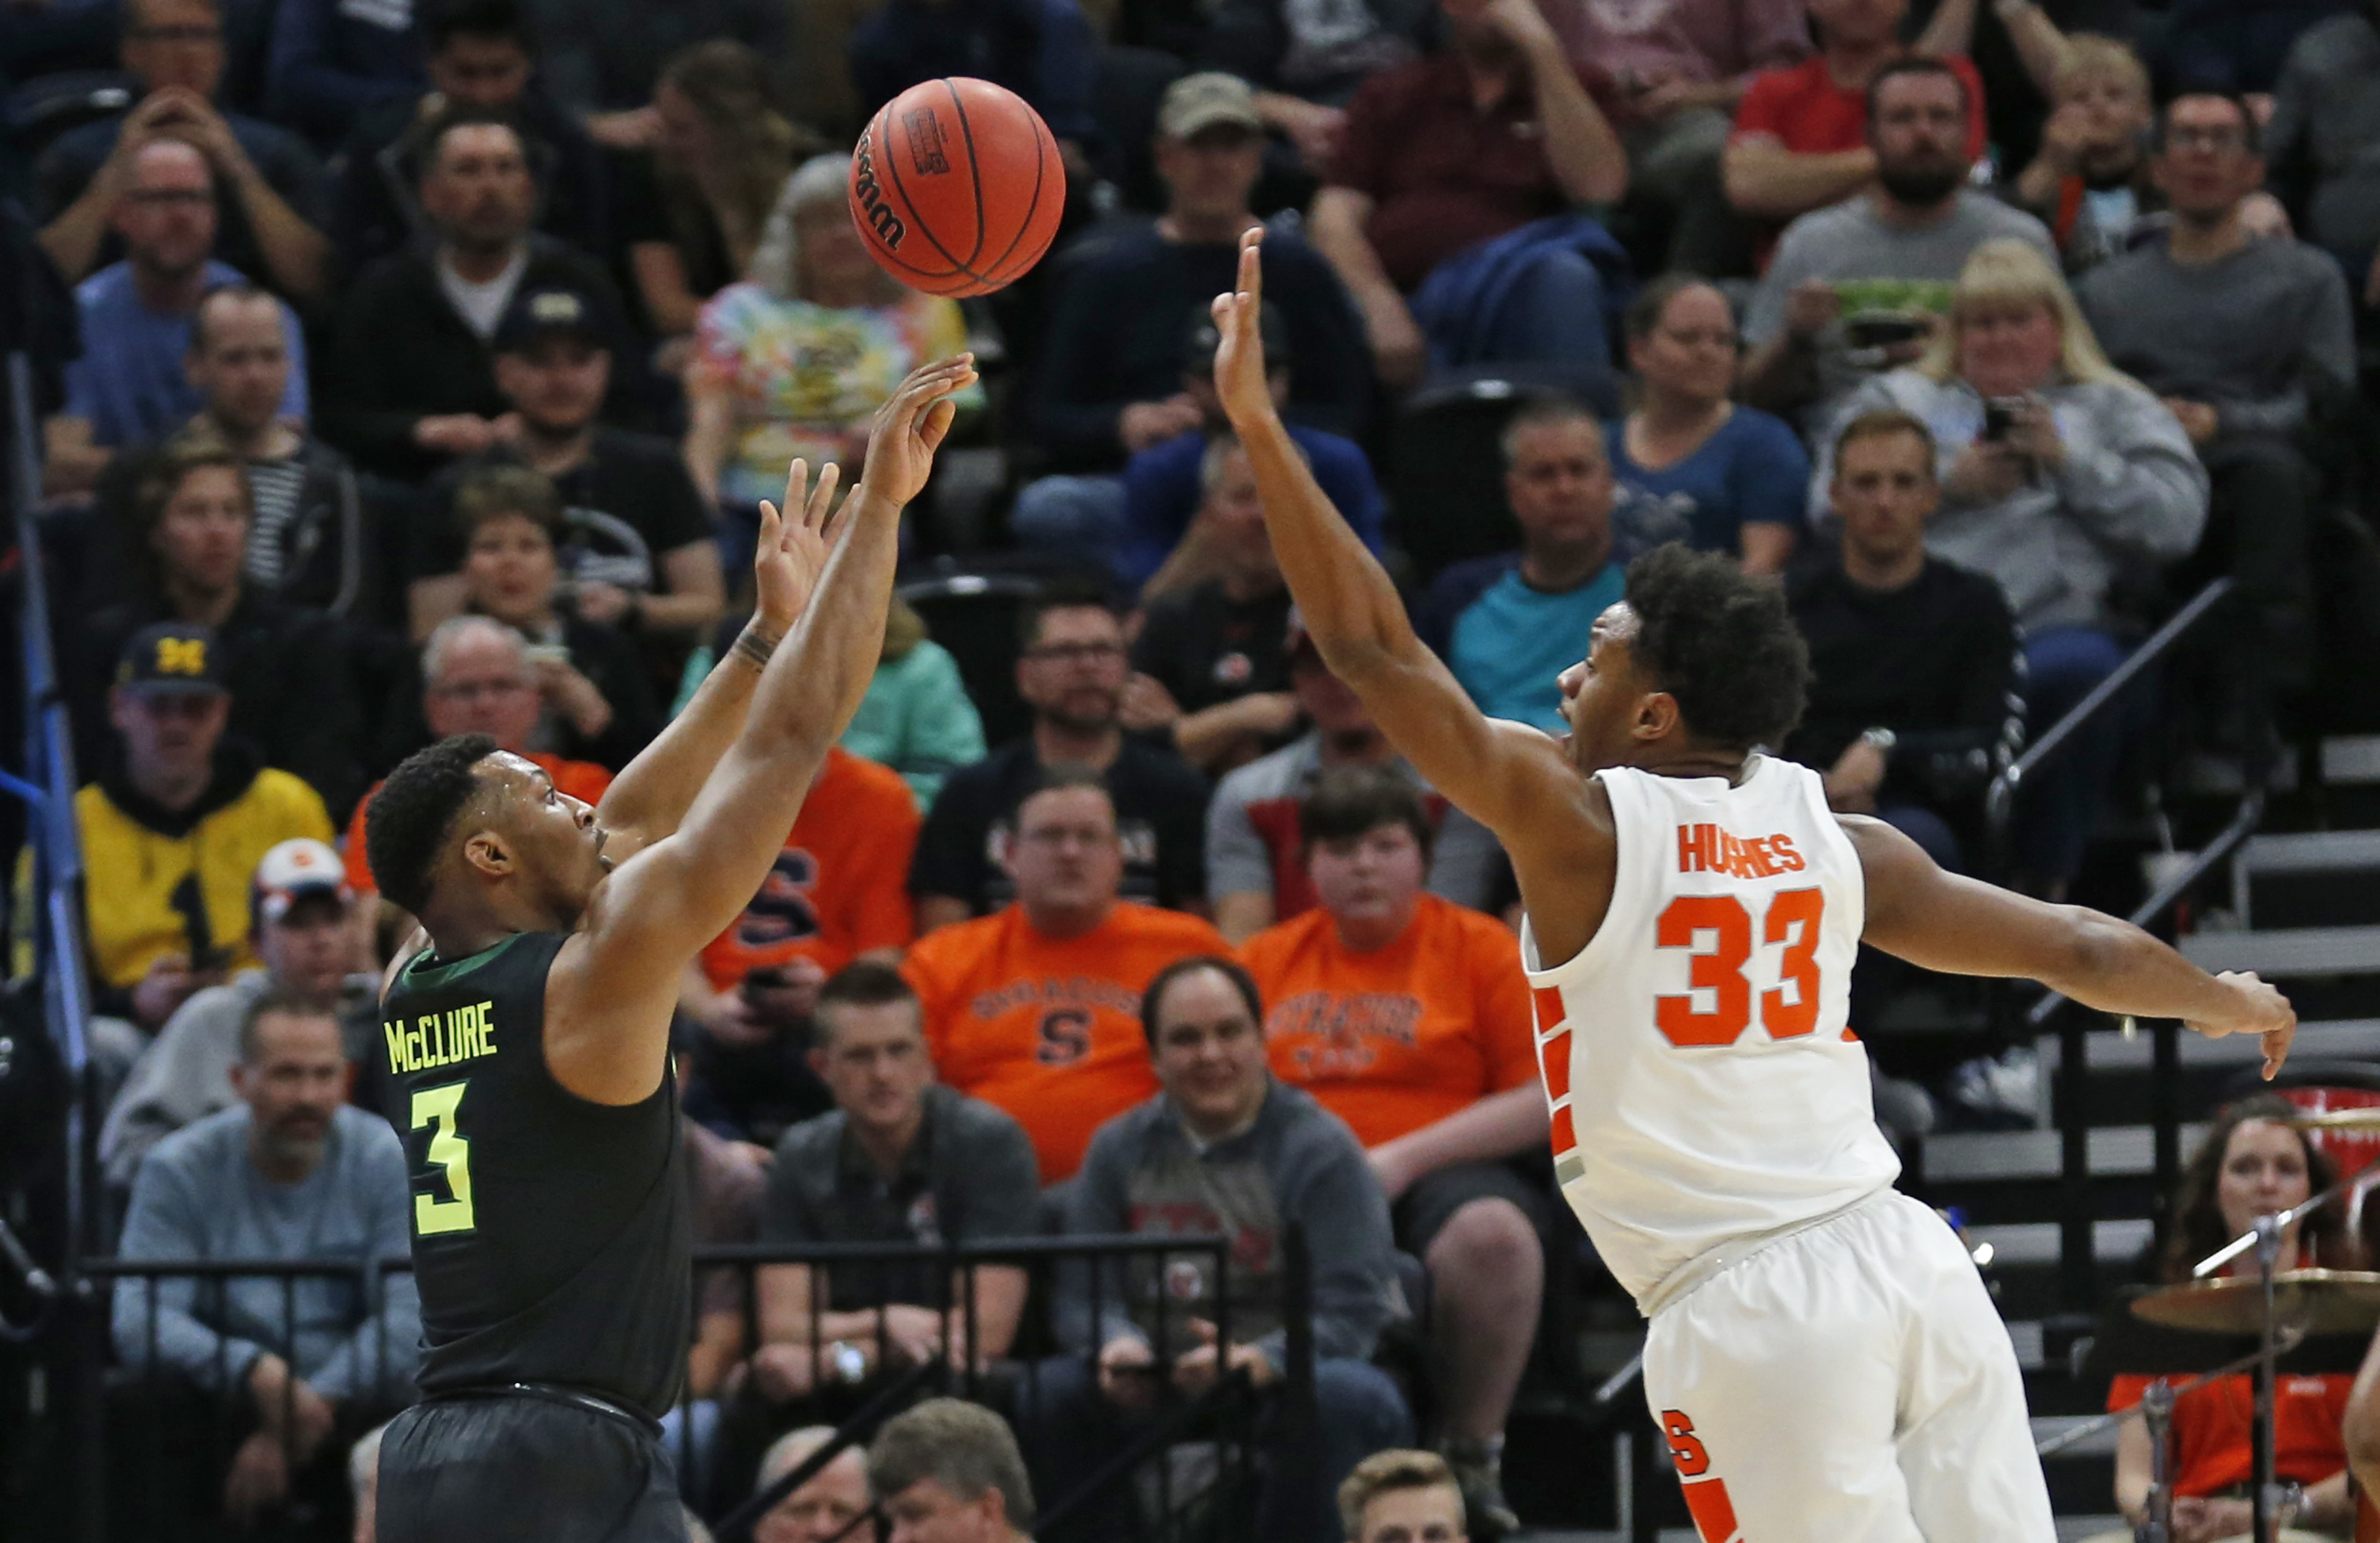 Hot-shooting Bears upset Syracuse in first round of NCAA Tournament | The Baylor Lariat5400 x 3500